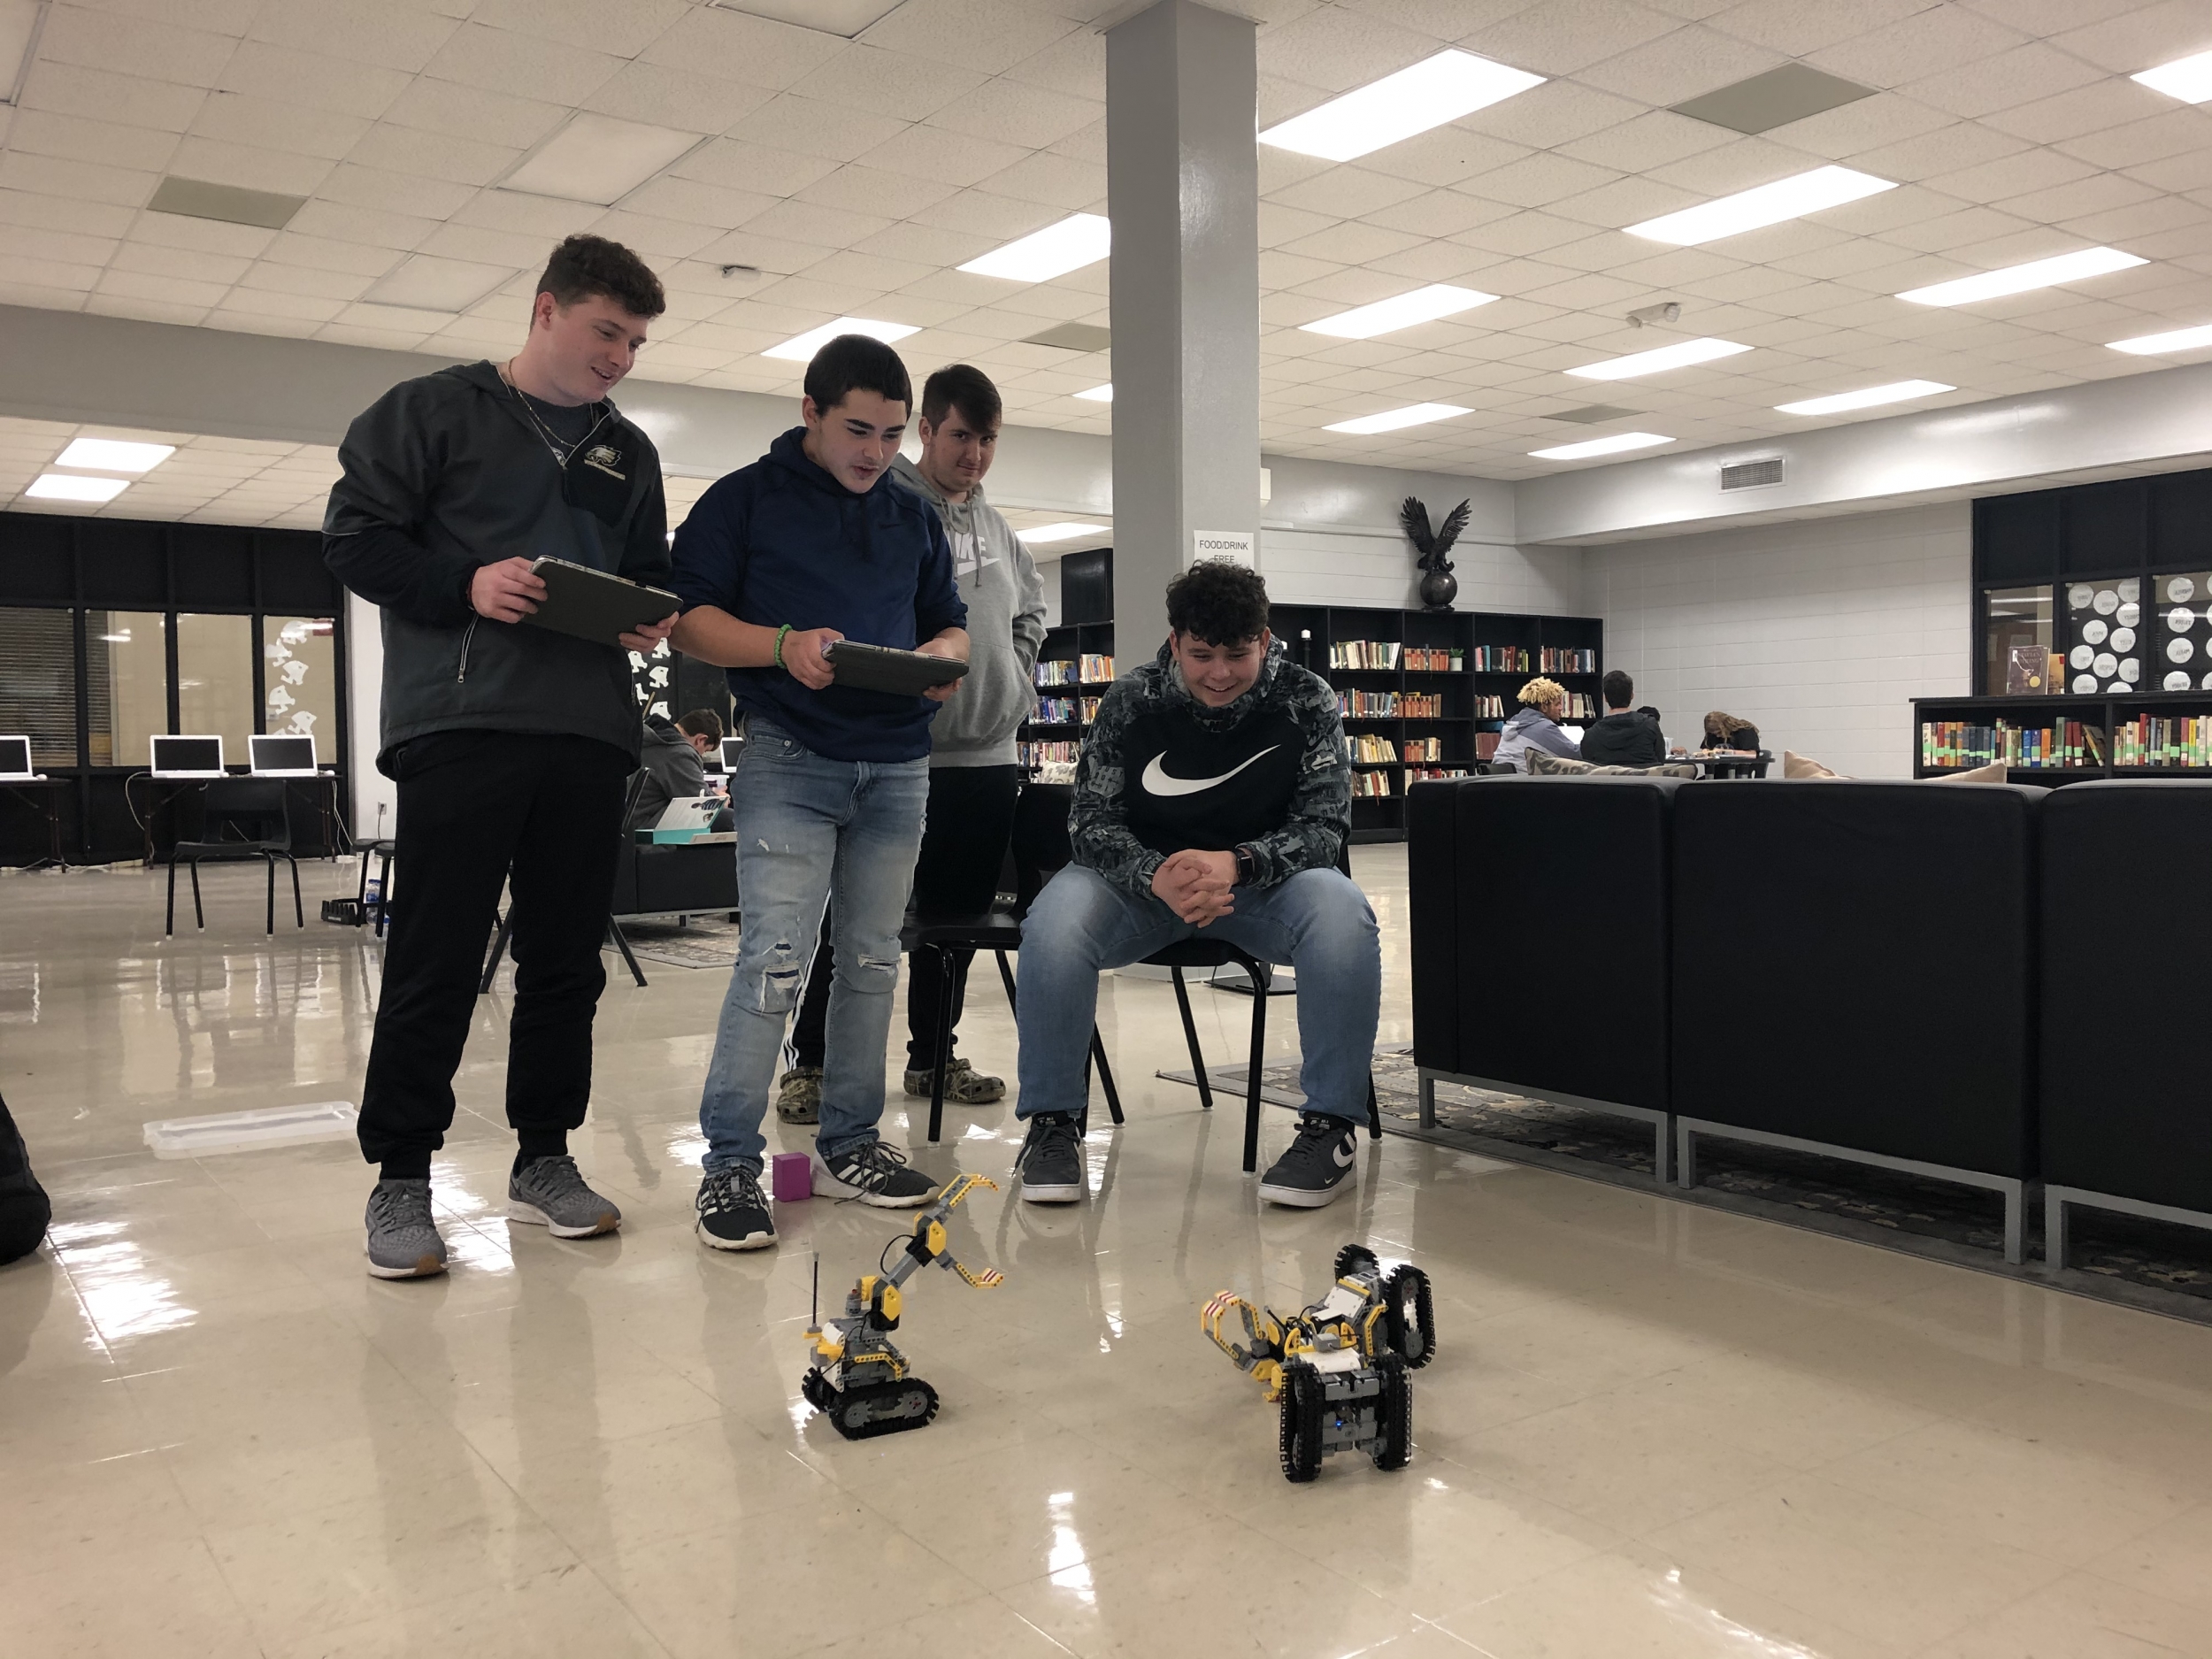 Four high school students look at 2 small robots on the ground that are moving, while one controls it from an ipad